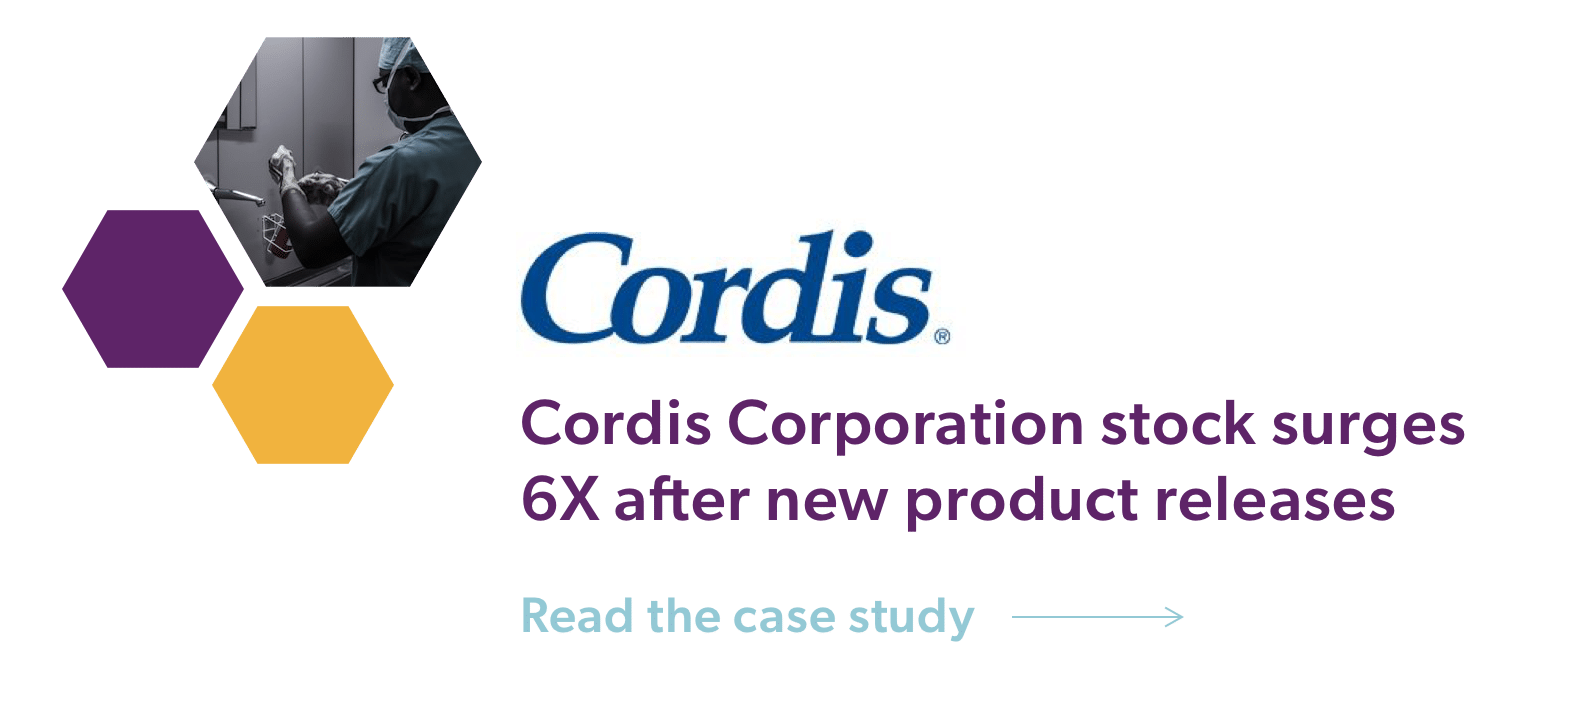 Jobs-to-be-Done Example Cordis Corporation